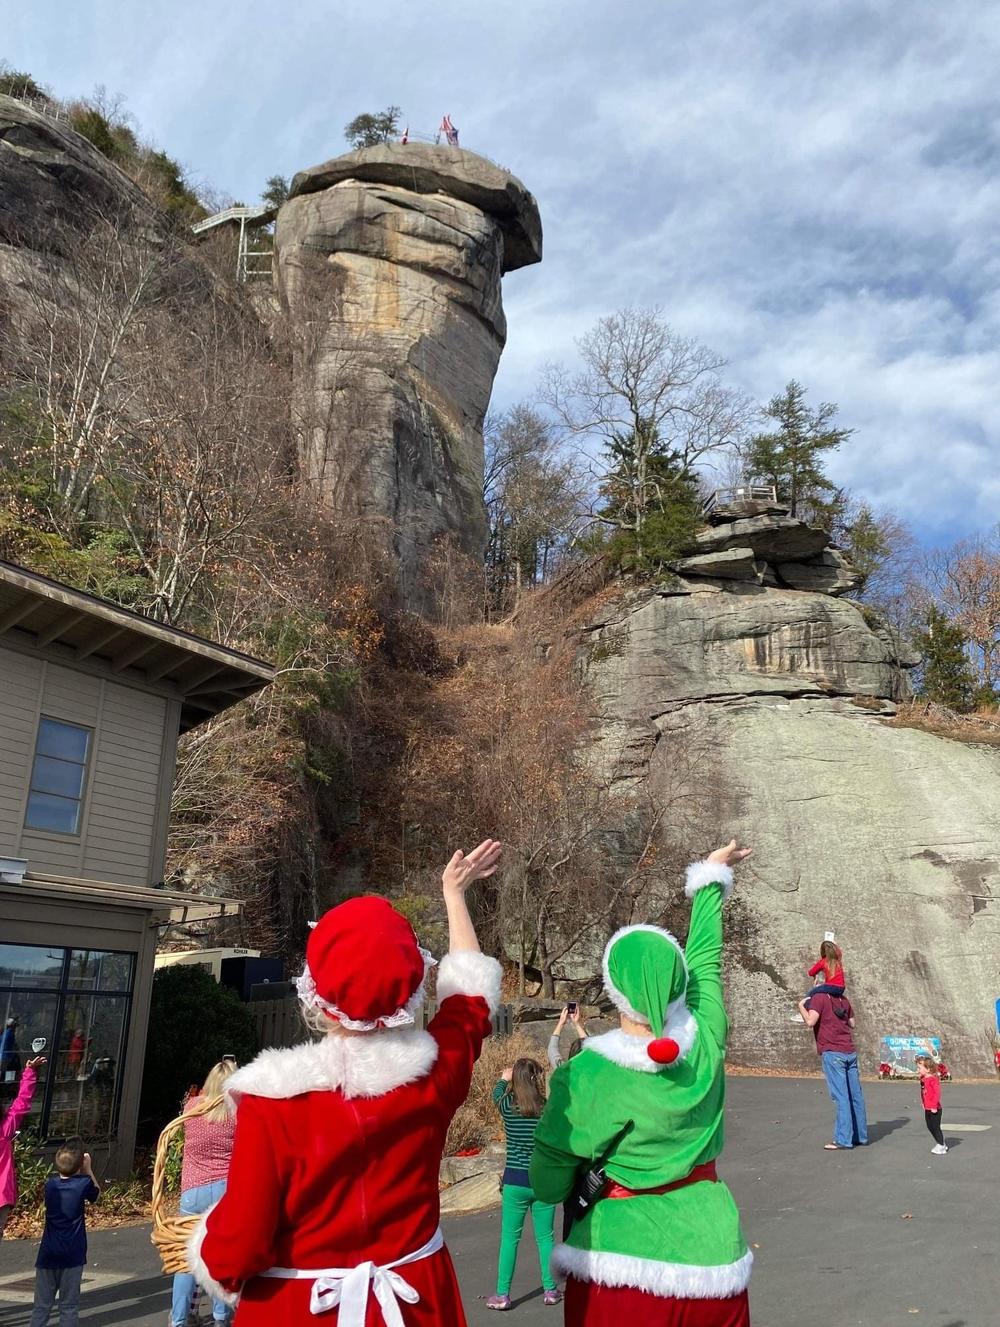 Spectators cheer as Santa rappels down Chimney Rock in 2022. The day is also filled with events like guided hikes and nature crafts.